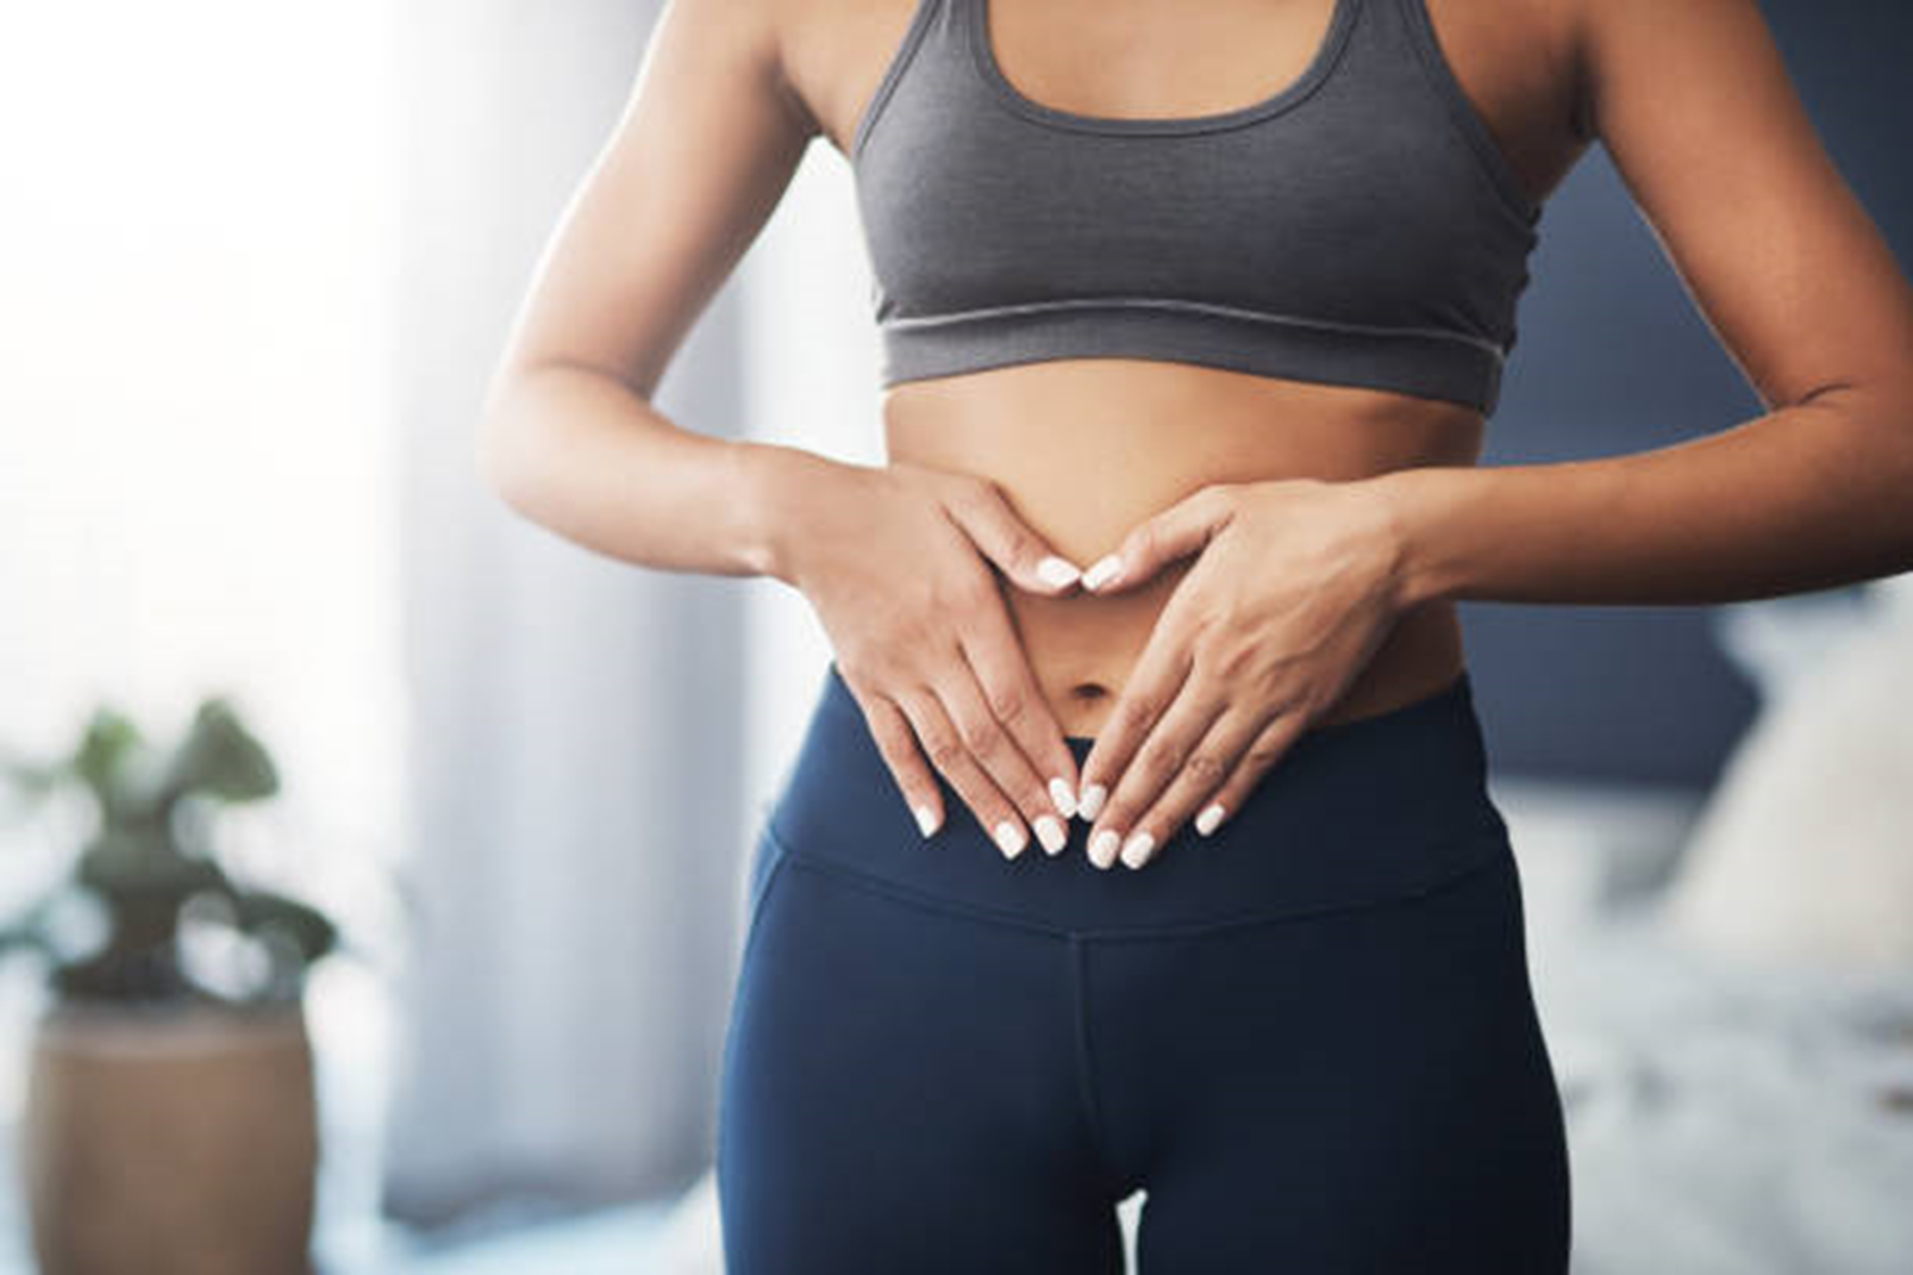 10 Things to Know about Tummy Tucks